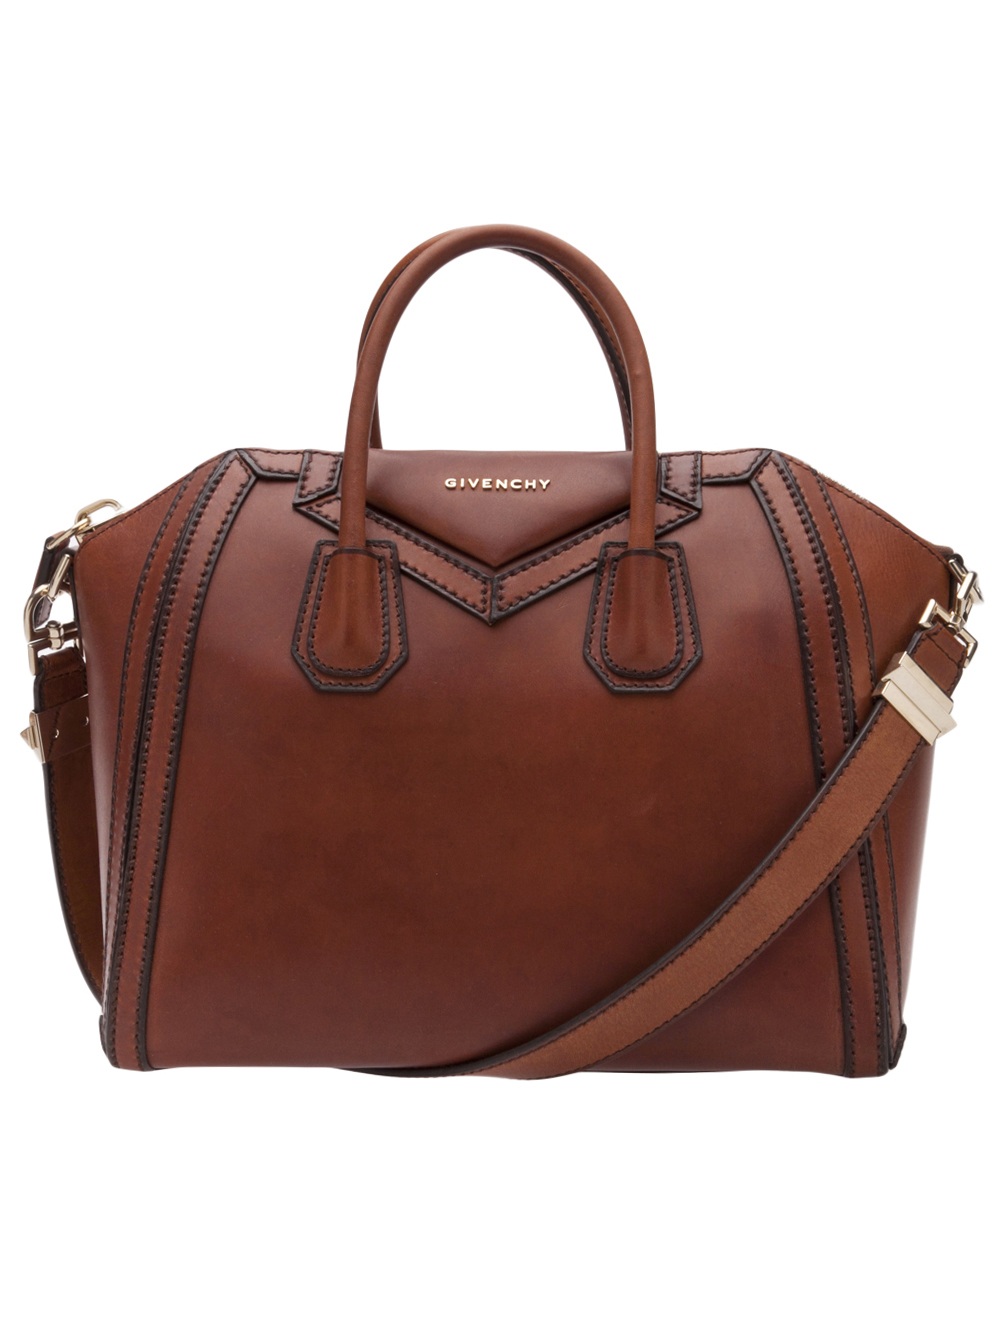 Givenchy Tote Bag in Brown | Lyst